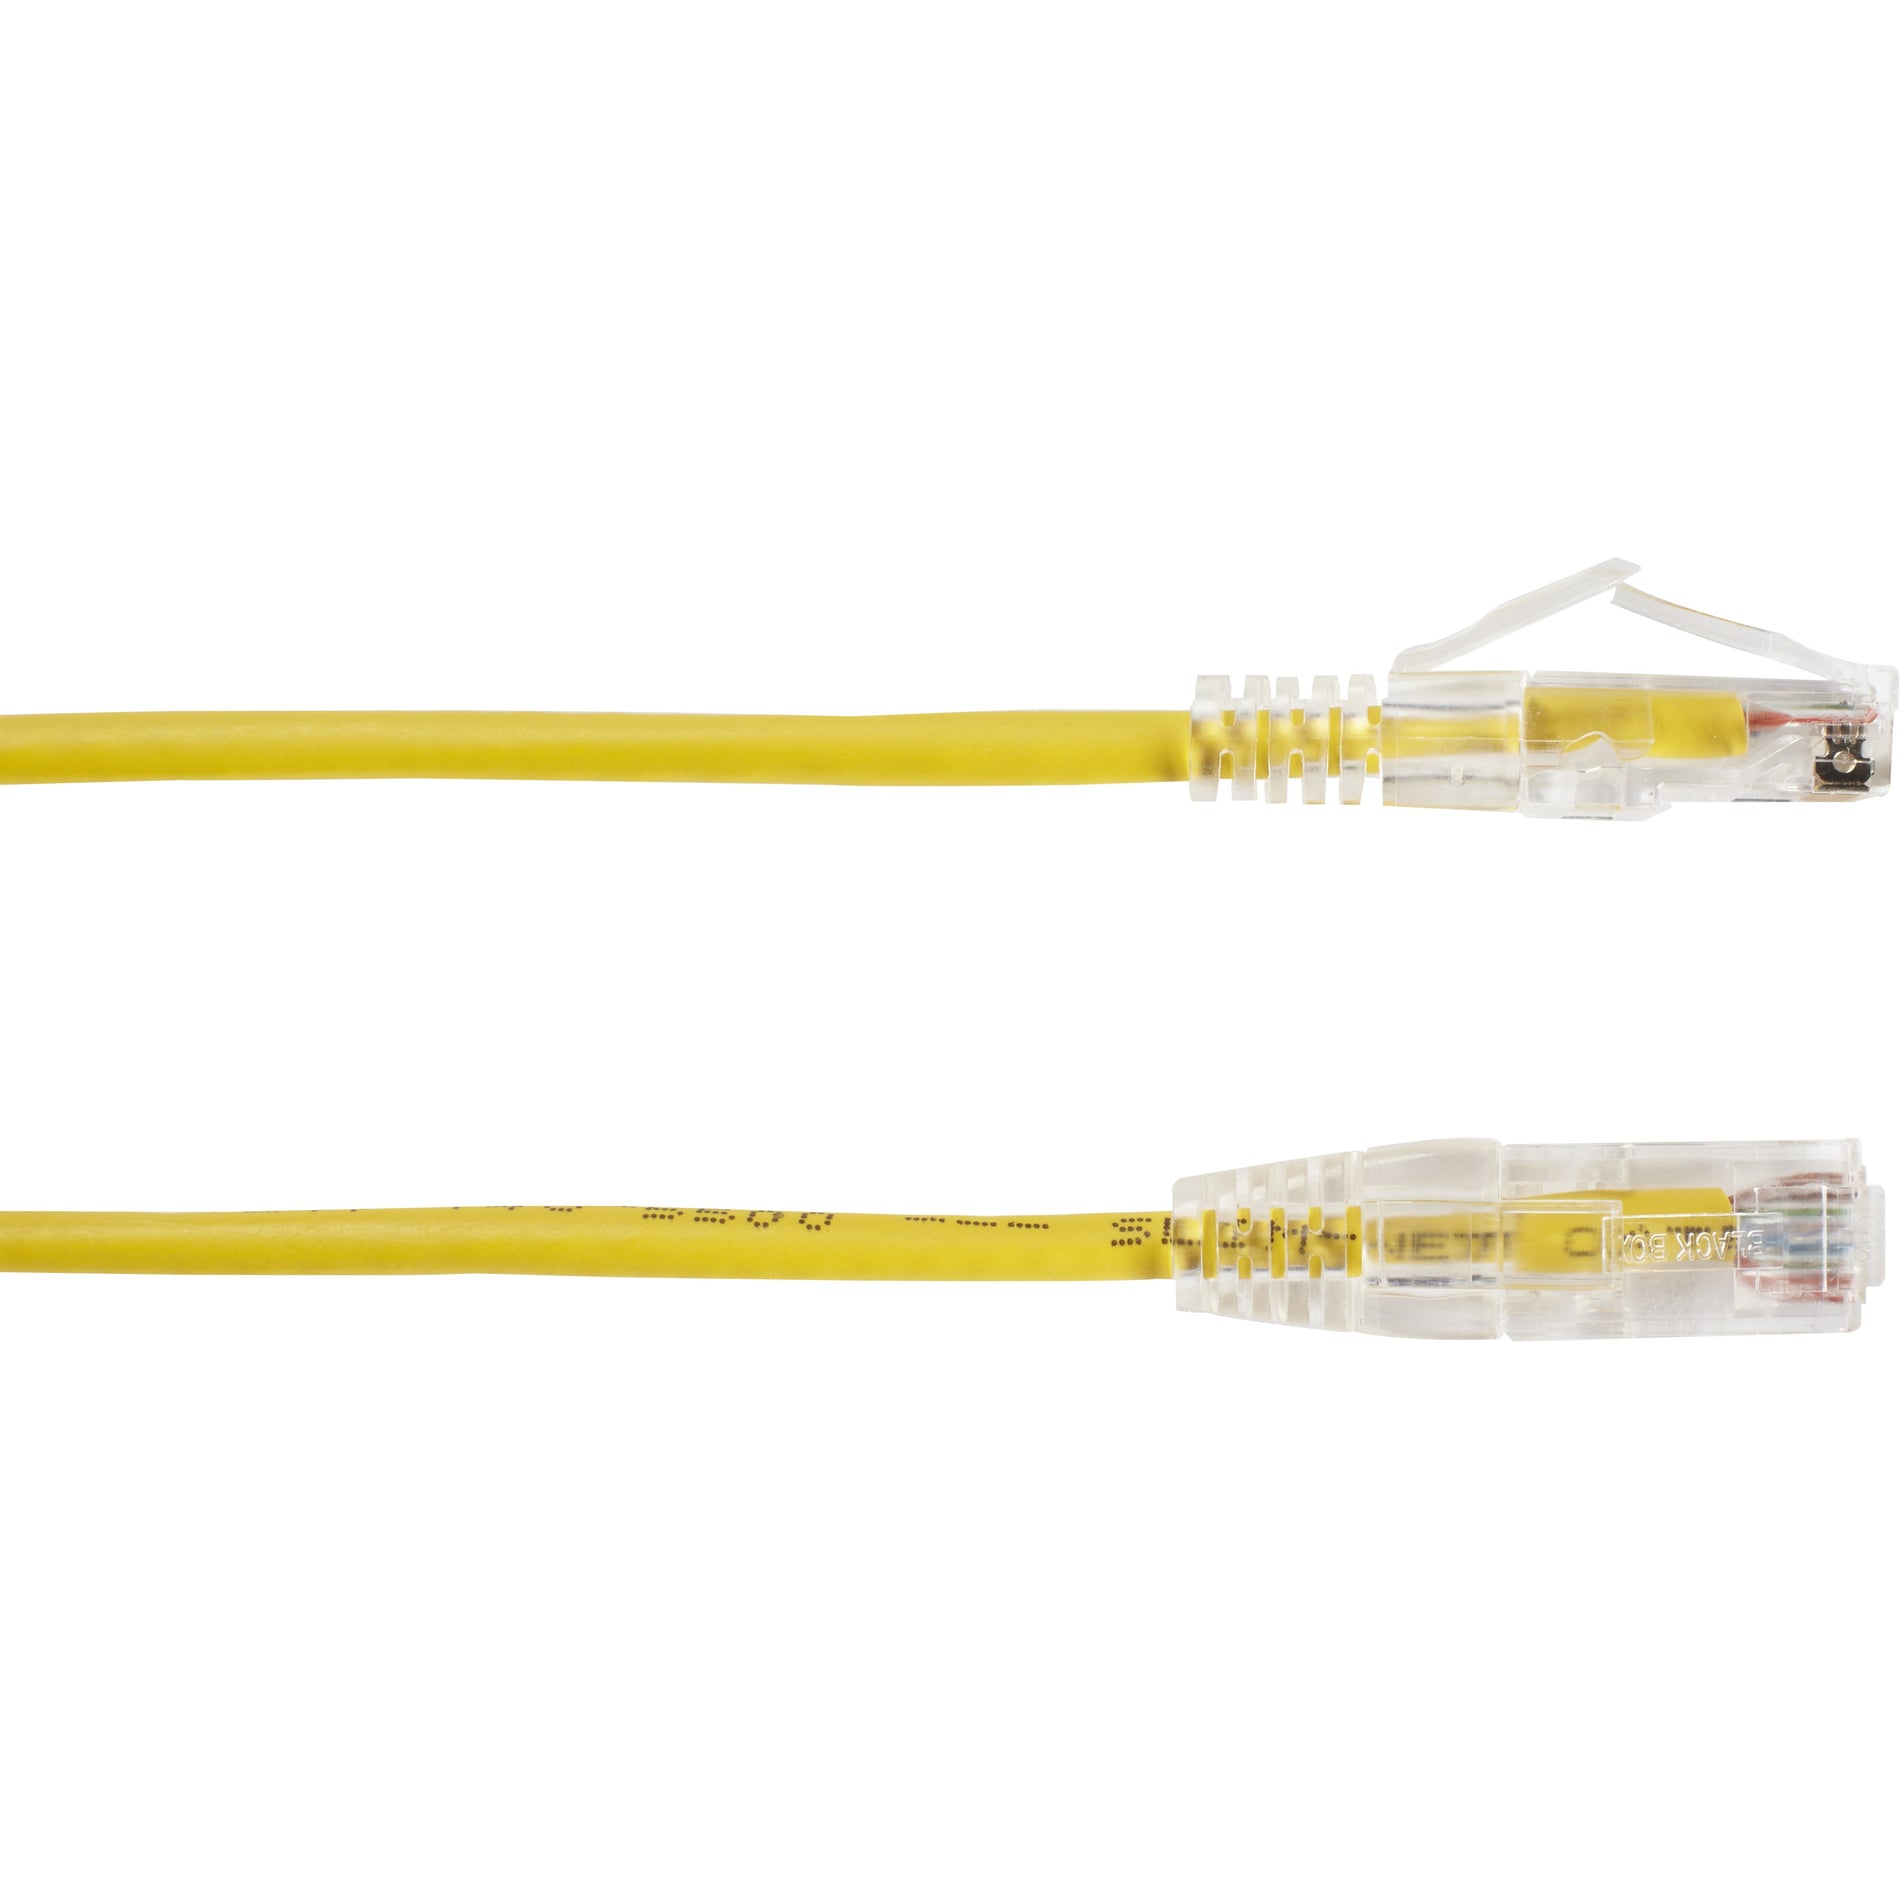 Black Box C6APC28-YL-05 Slim-Net Cat.6a UTP Patch Network Cable, 5 ft, Snagless Boot, 10 Gbit/s Data Transfer Rate, Yellow